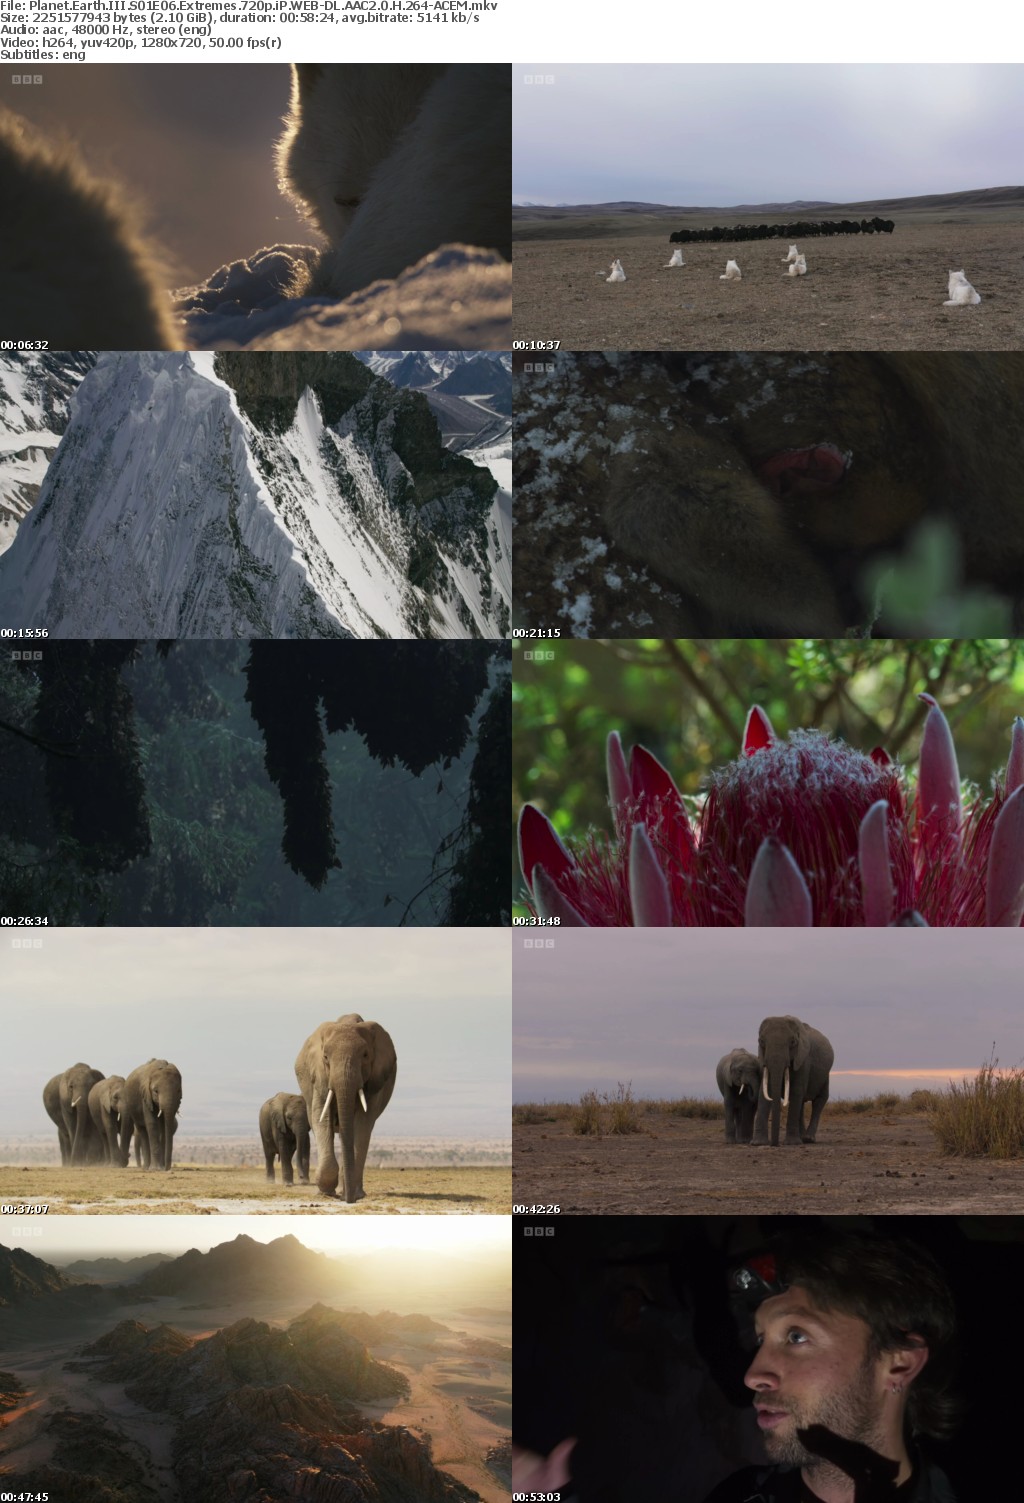 Planet Earth III S01E06 Extremes 720p iP WEB-DL AAC2 0 H 264-ACEM